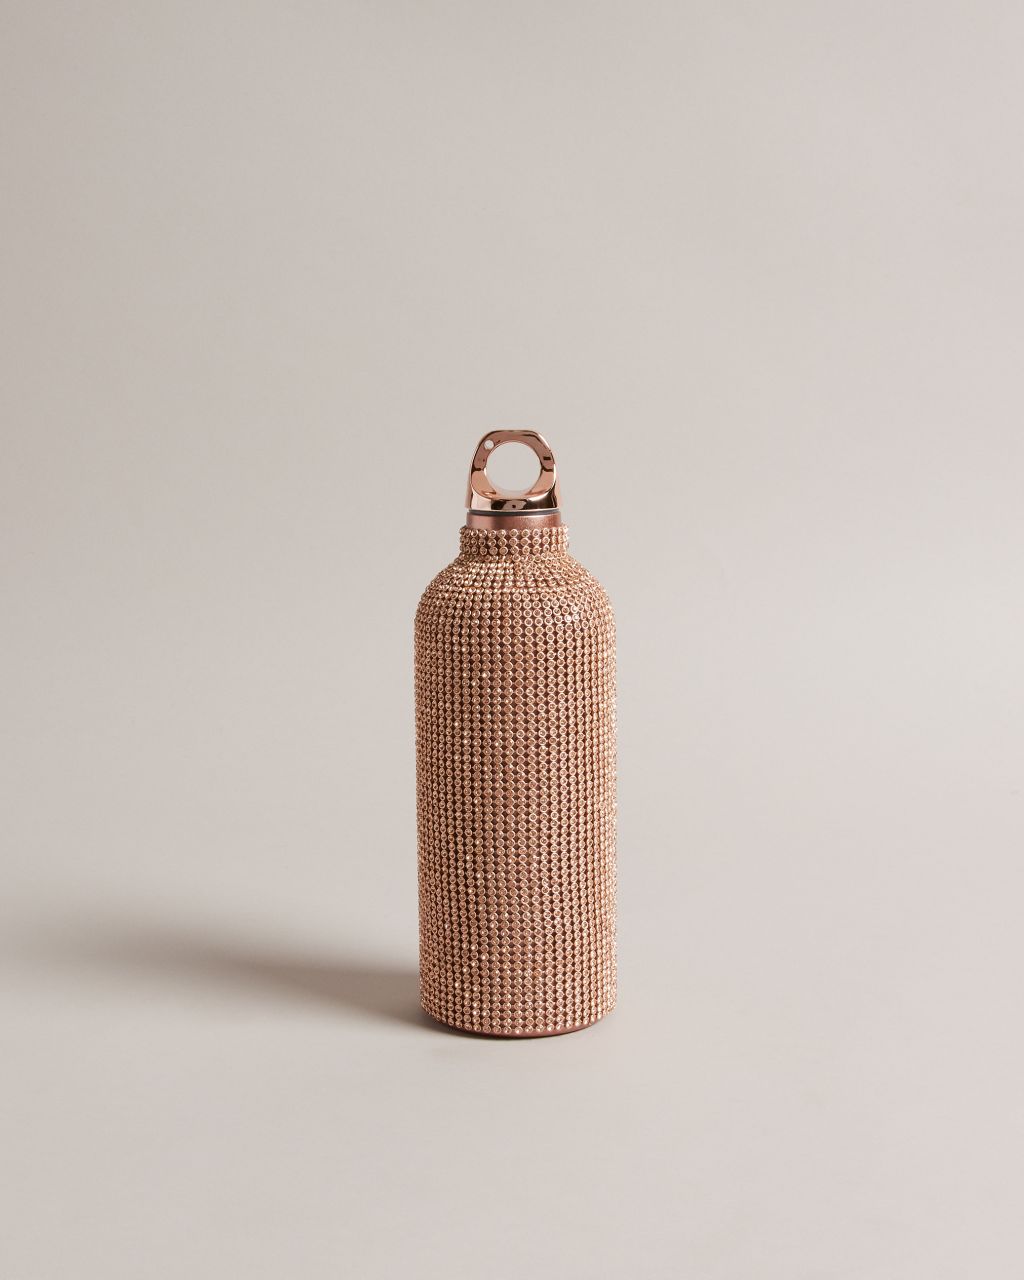 Embellished Water Bottle in Rose Gold, Jazzii product